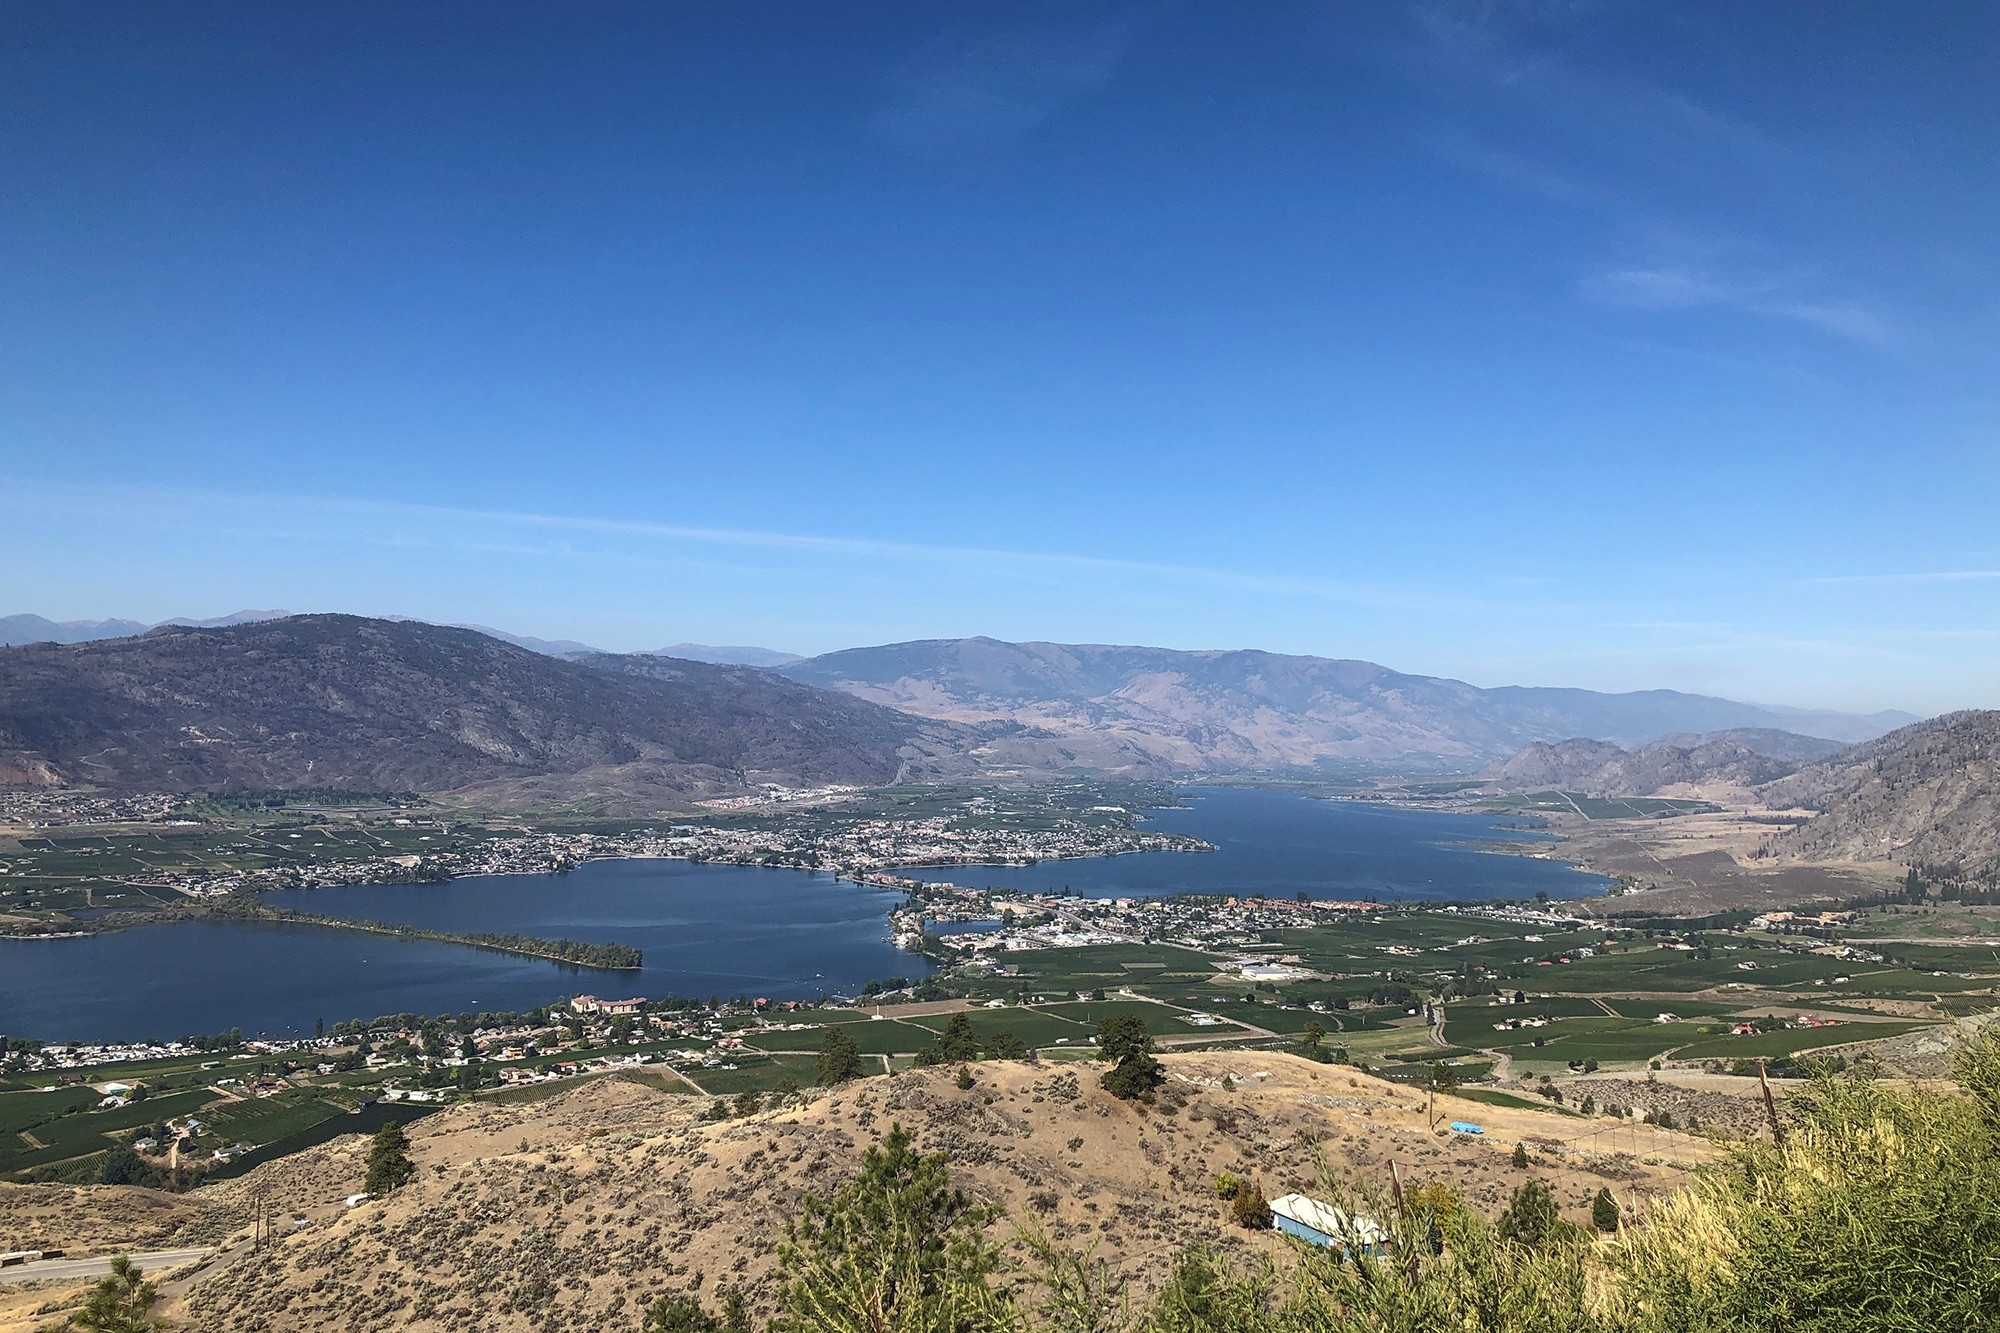 Looking at Osoyoos from a viewpoint off the Crowsnest Highway 3 at the start of the journey towards Nelson.